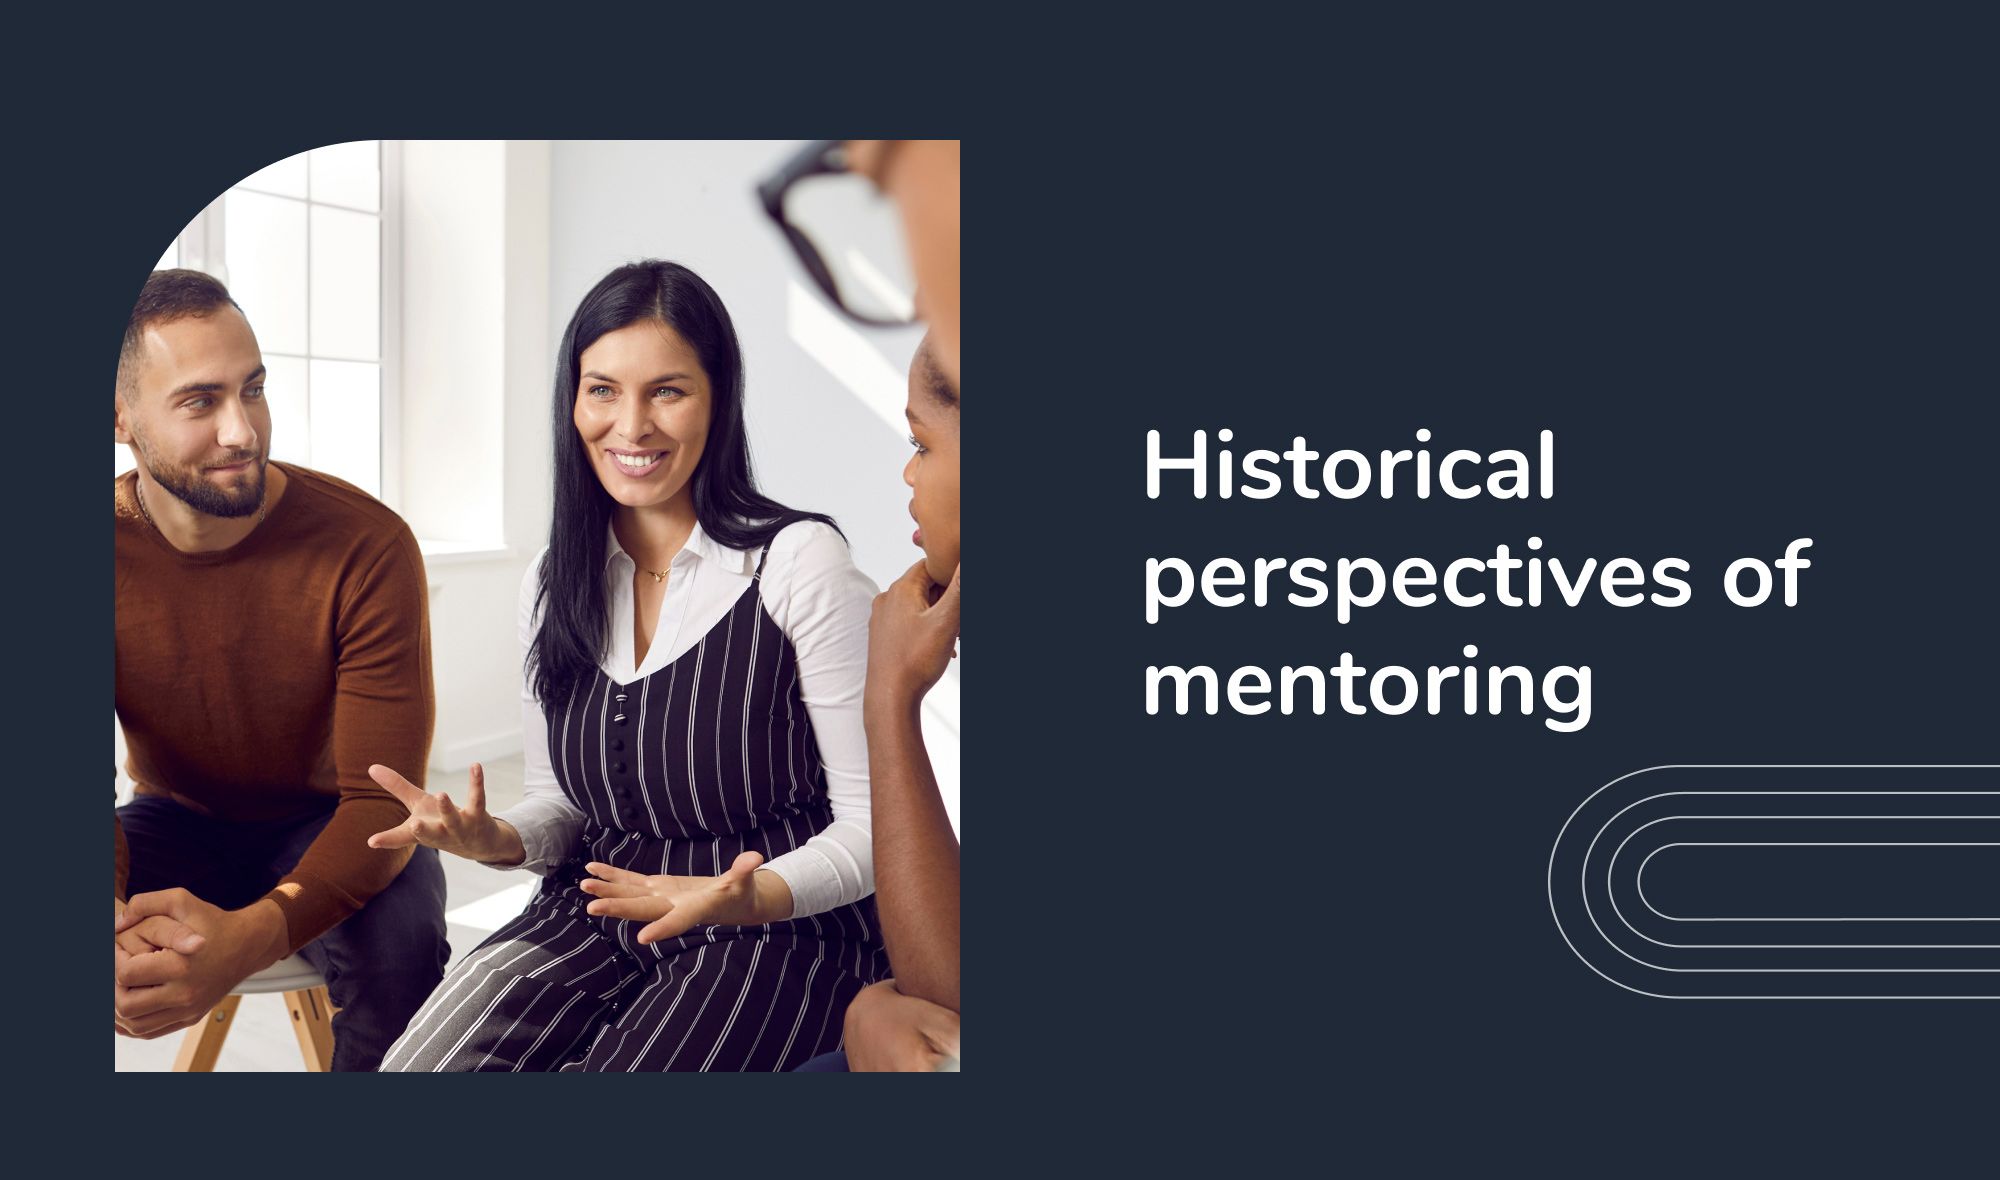 Which of the following statements about mentoring is true? - Historical perspectives of mentoring